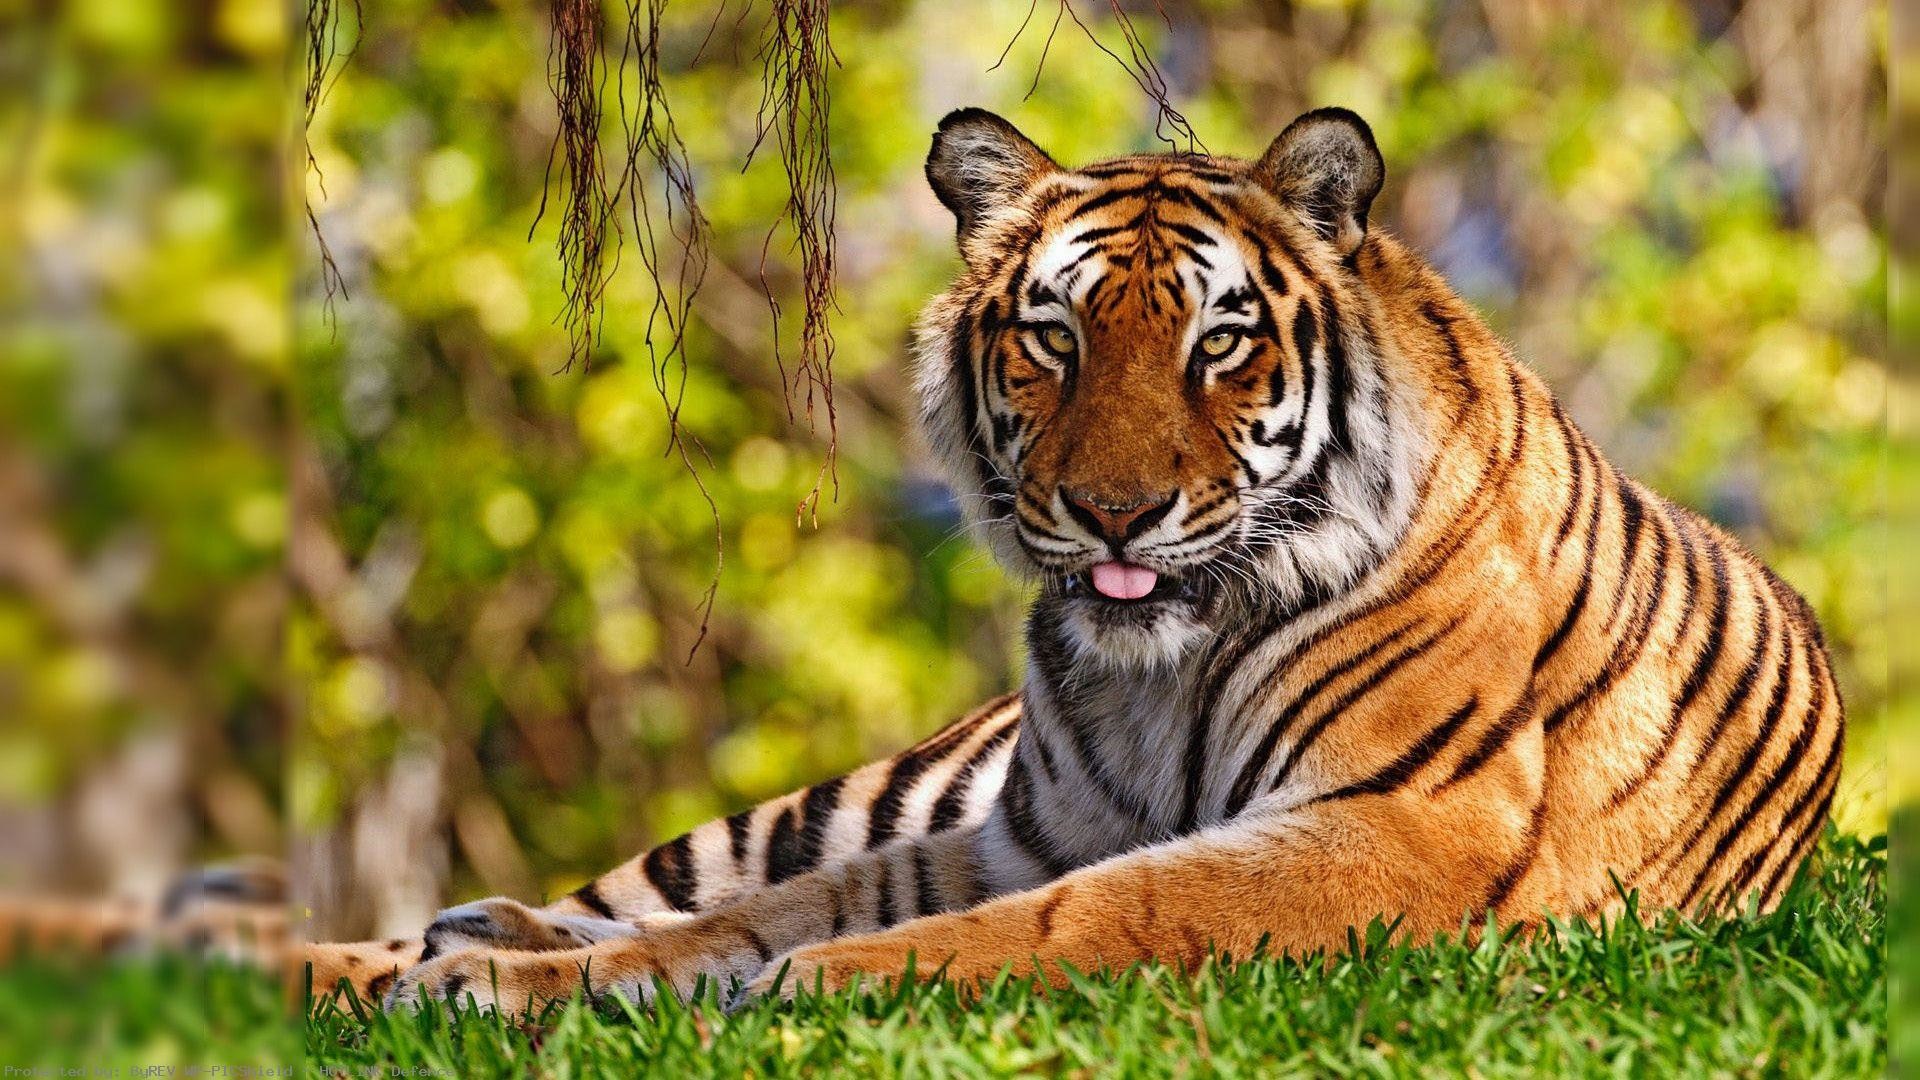 Best Bengal Tiger Pictures and wallpaper wp6003413